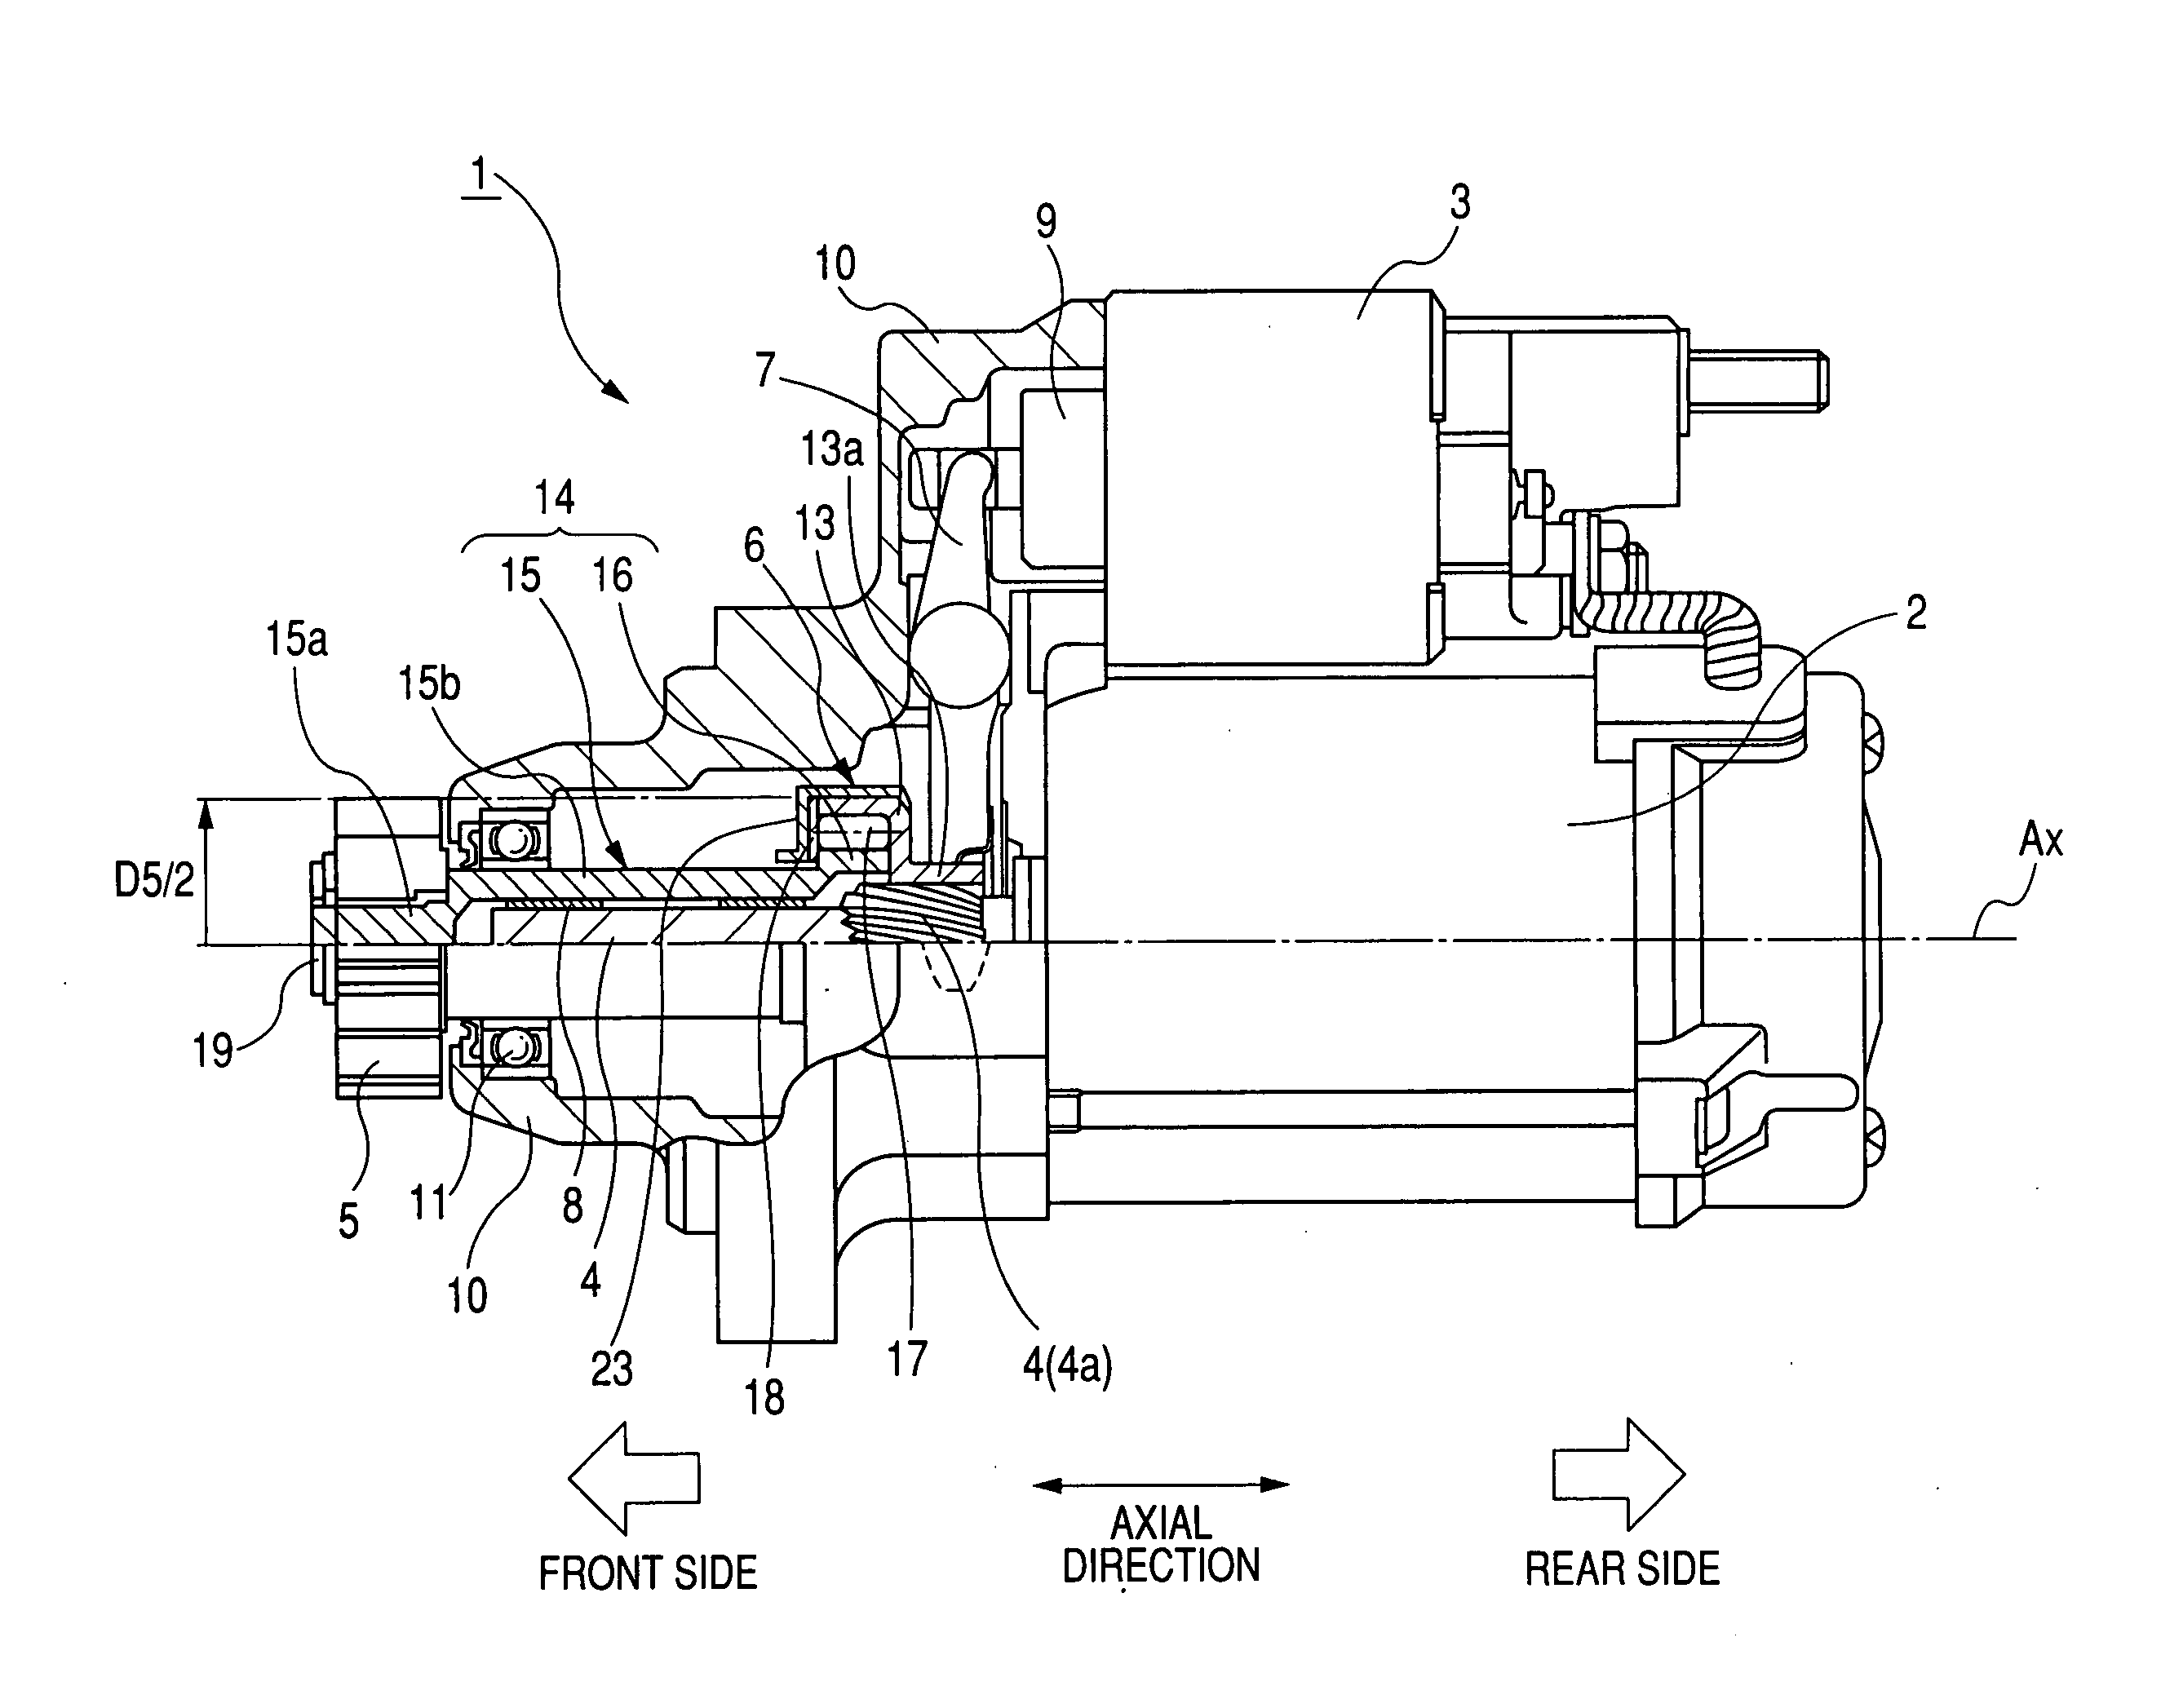 Starter with clutch coaxially disposed on output shaft of motor